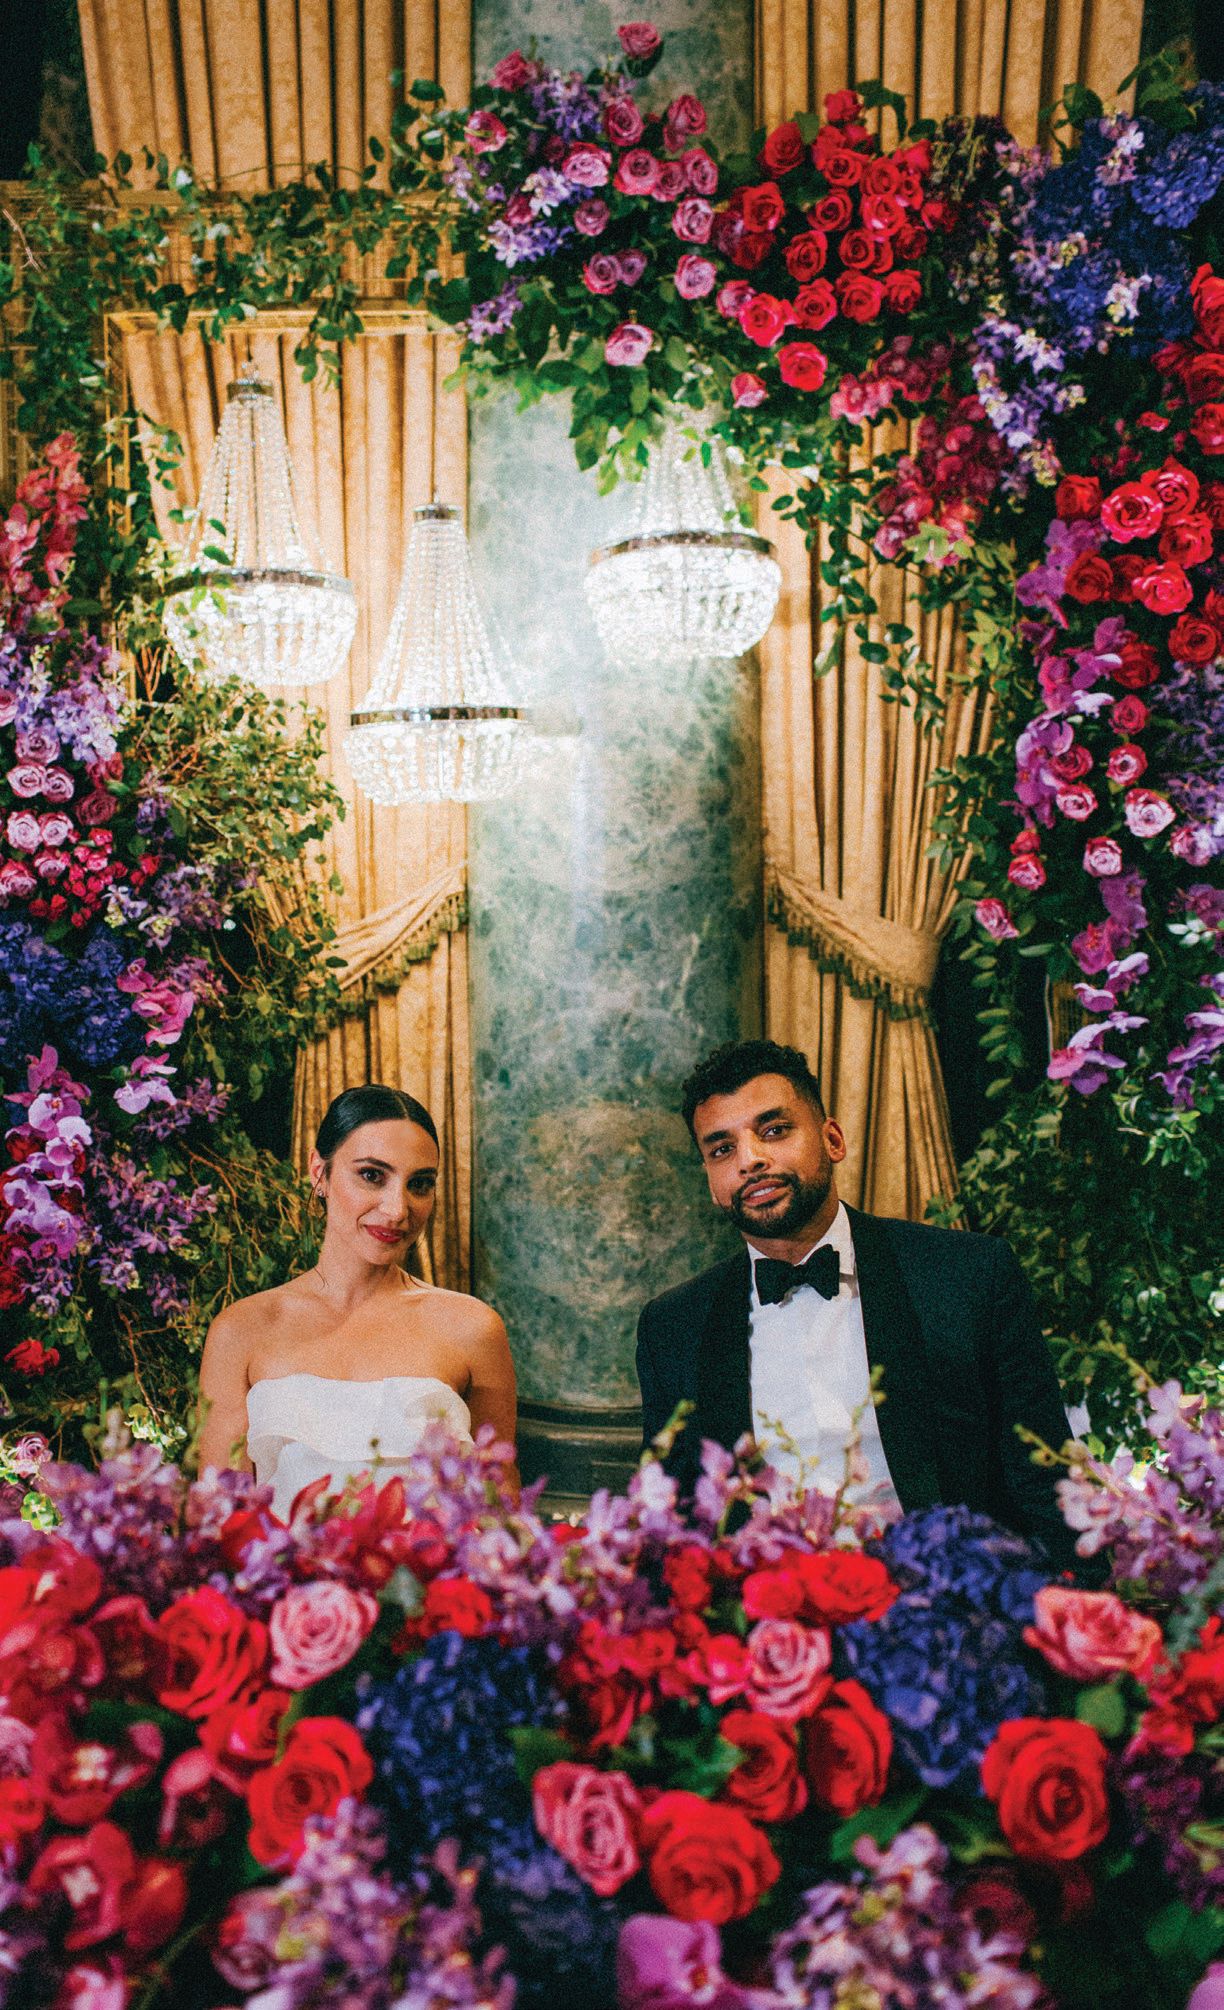 Roma and Umar gave off royal-wedding vibes posing for a portrait among their majestic florals. Photographed by Caroline Ghetes